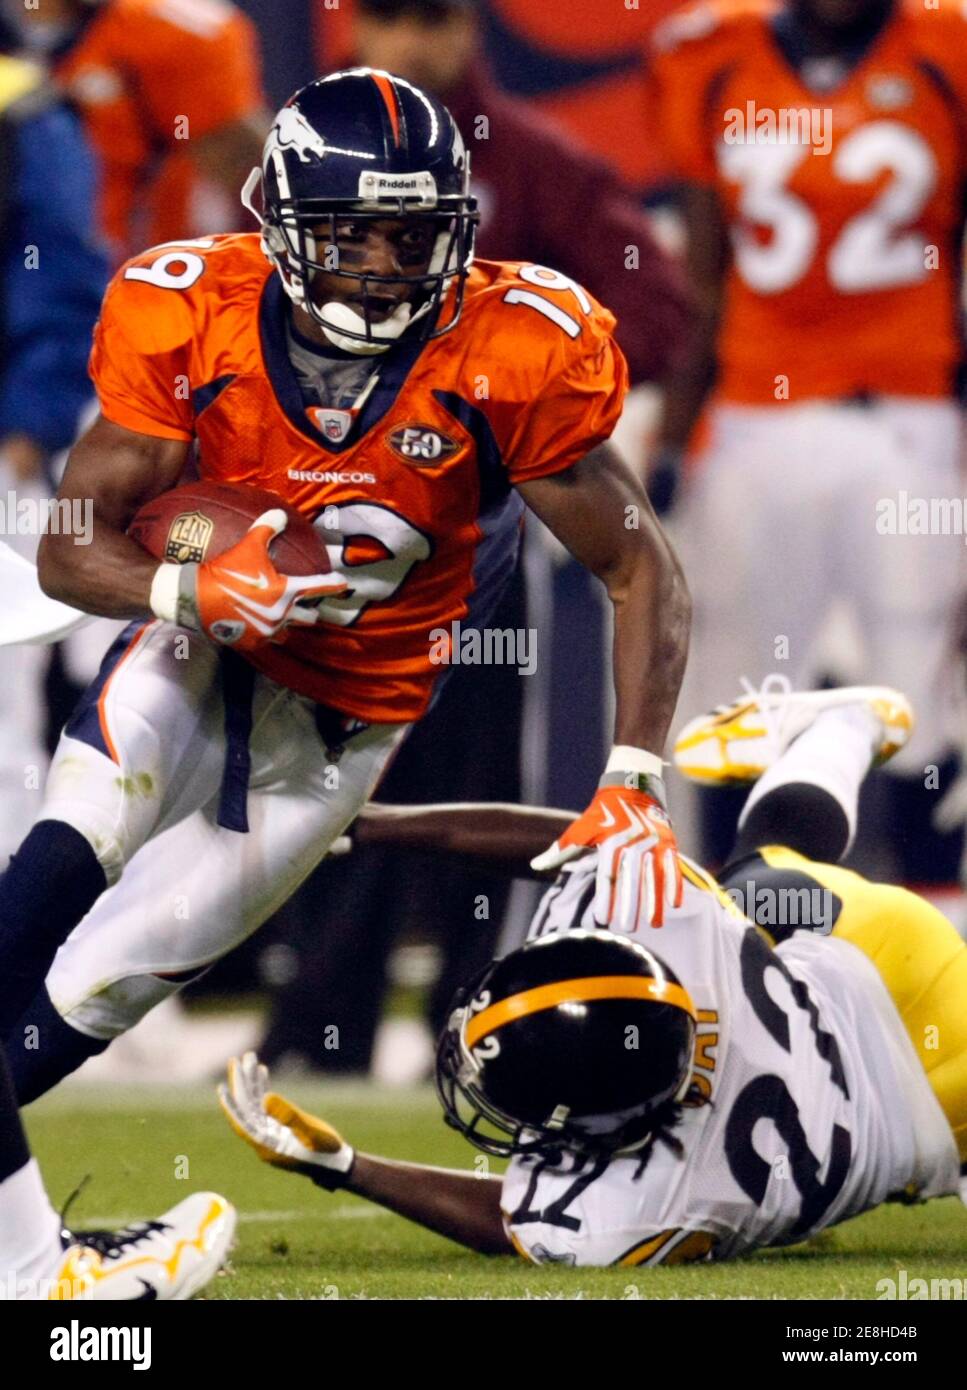 Denver Broncos wide receiver Eddie Royal (L) eludes a tackle by Pittsburgh Steelers cornerback William Gay in the first quarter of their NFL football game in Denver November 9, 2009. REUTERS/Rick Wilking (UNITED STATES SPORT FOOTBALL) Stock Photo